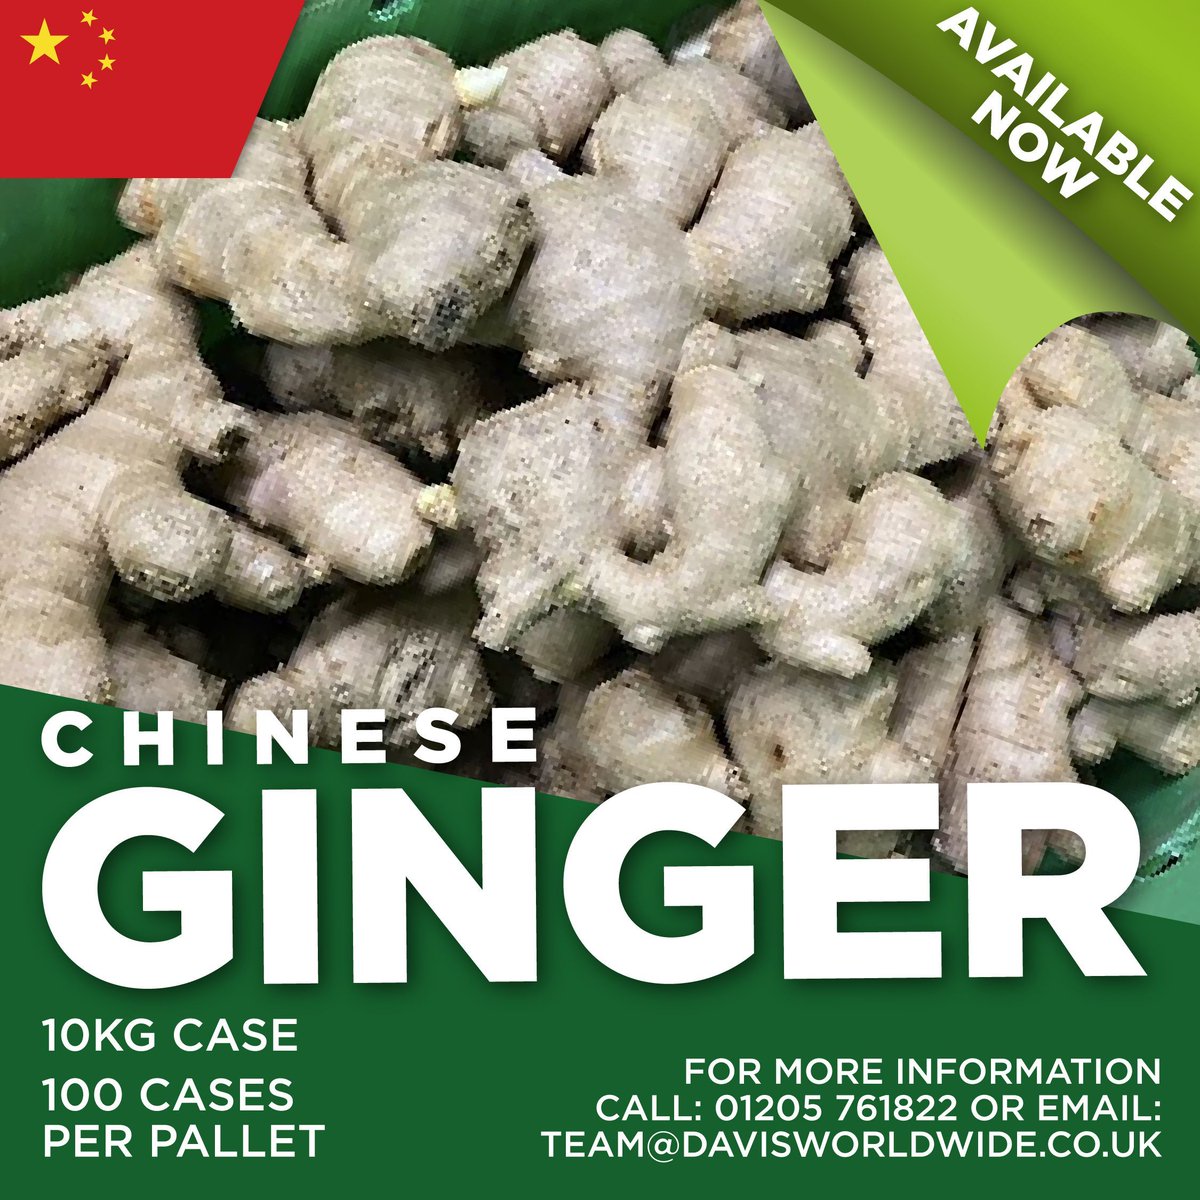 Chinese Root Ginger is now available. The spicy root is used in various foods, drinks and remedies.

Enquire today. Call our team on 01205 761822 or mail team@davisworldwide.co.uk

#ginger #freshginger #gingerroot #rootginger #spices #asian#asiancuisine #herbal #spicy